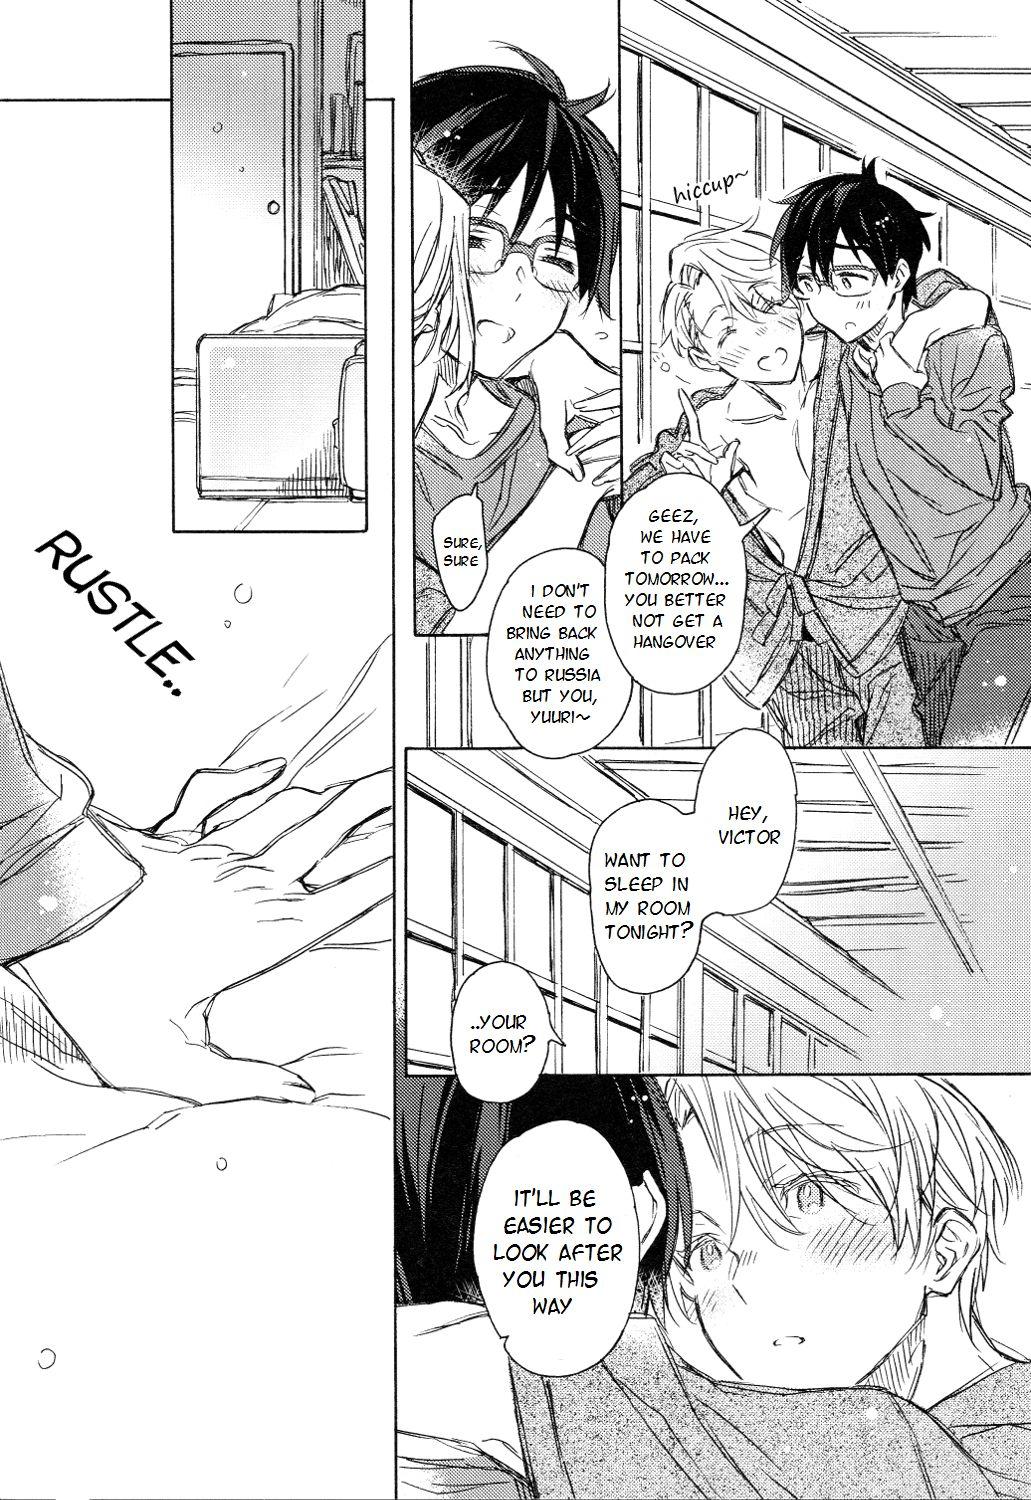 Trans BRAND NEW DAY,BRAND NEW LIFE - Yuri on ice Banho - Page 7